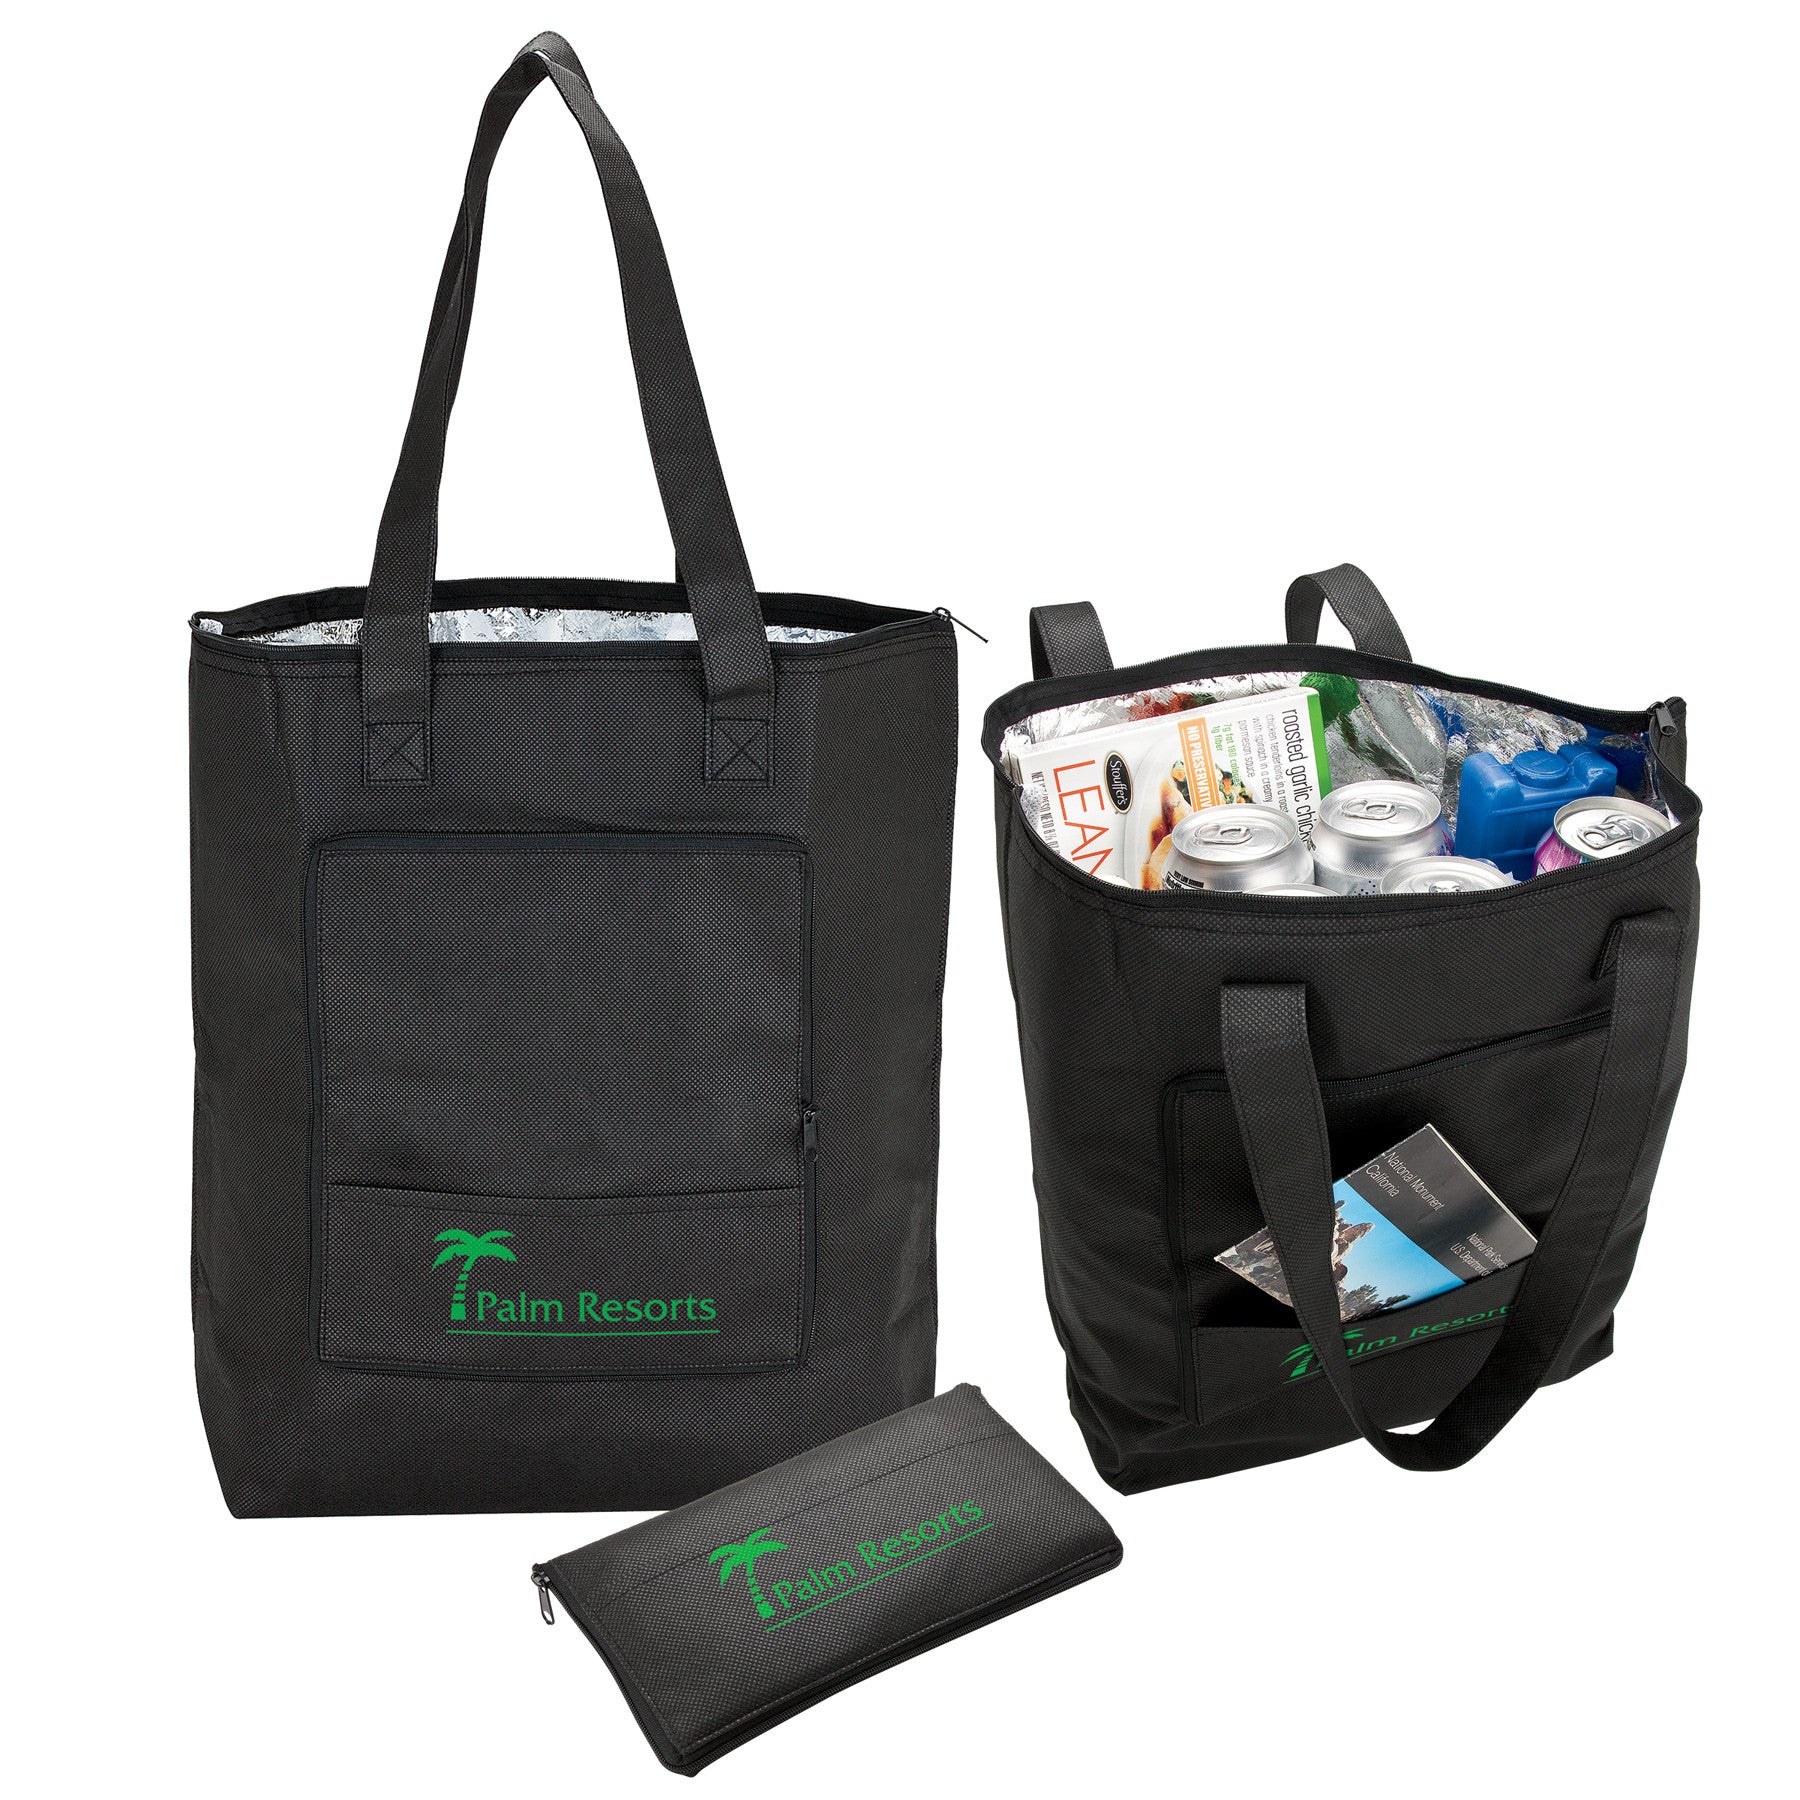 Foldaway Insulated Grocery Tote